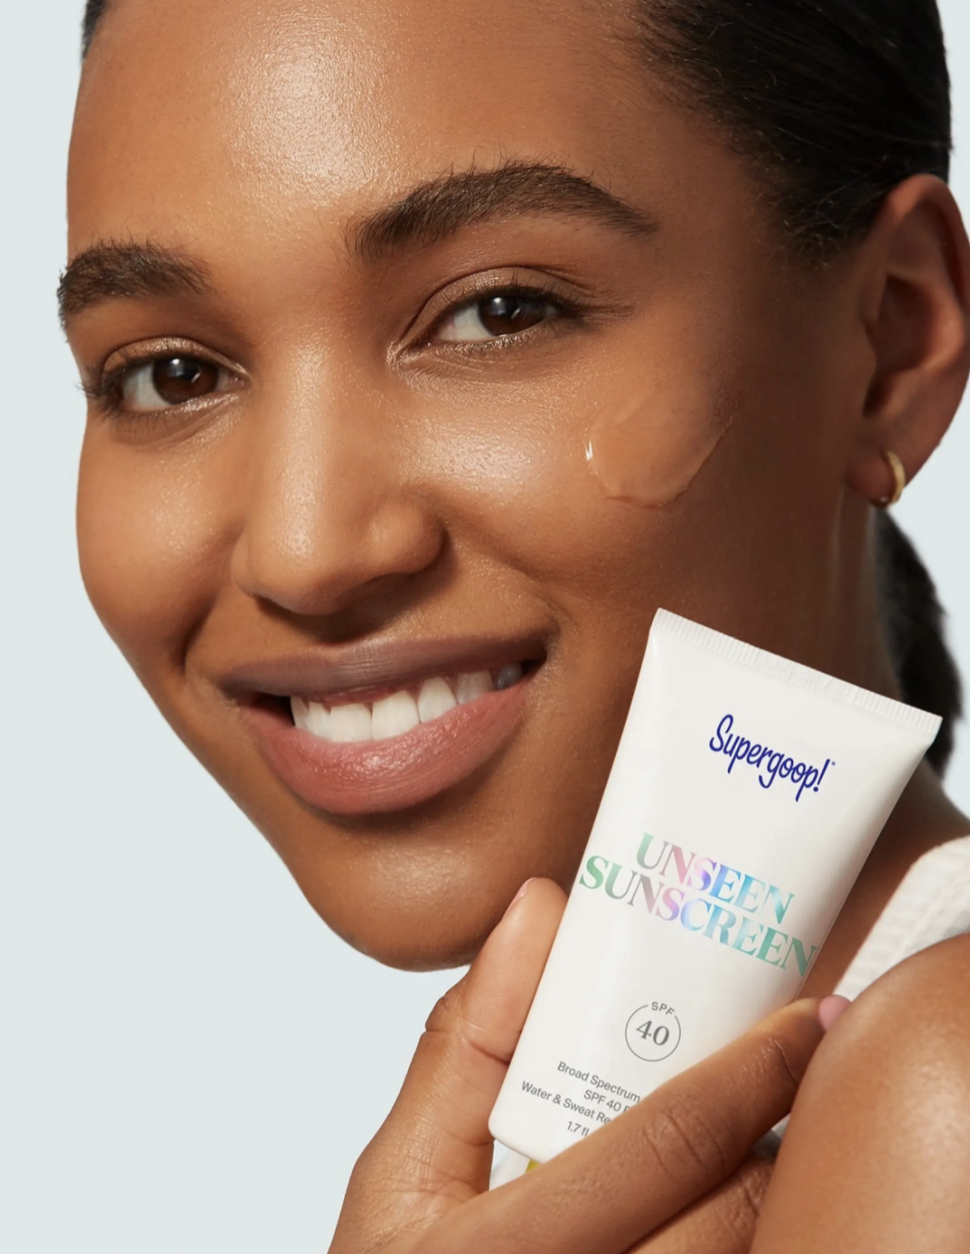 model holding the sunscreen container with a blotch of clear sunscreen on their cheek